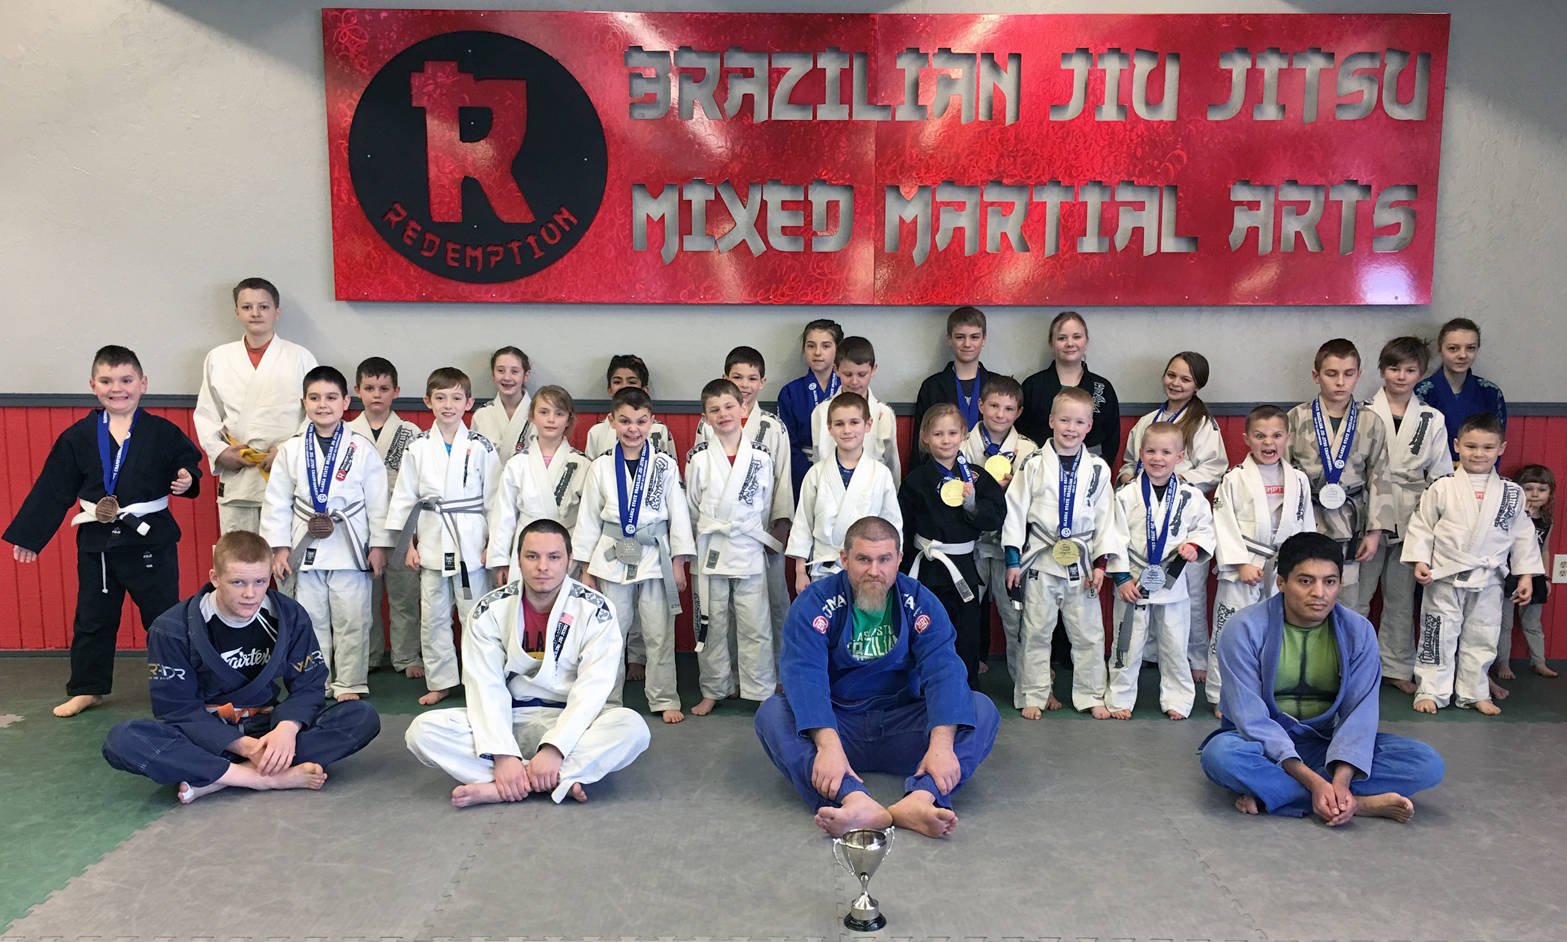 Above is the kids Brazilian Jiu-Jitsu team from Redemption MMA which tied for second place at state: William Bogart, Danny Bennett, Trenton Blume, Carter Norman, Richard Green, Lauren Chircop, Addy Nordwall, Elijah Fulk, Elias Fulk, Charisma Fulk, Hudson Link, Owen Payne, Anthony Payne, Noah Payne, Avery Medina, Sebastian Duyck, Logan Duyck, Levi Forest, Mason Snyder, Nathan Cox, Jacob Cox, Connor Kniceley-John, Milo Bogart, Cali Bennett and Colette Kolesar. Coaches in front from left to right are Sean Babitt, Jacob Montgomery, Redemption Head BJJ coach George Grossman and Adam McClure. (Photo provided by Redemption MMA)